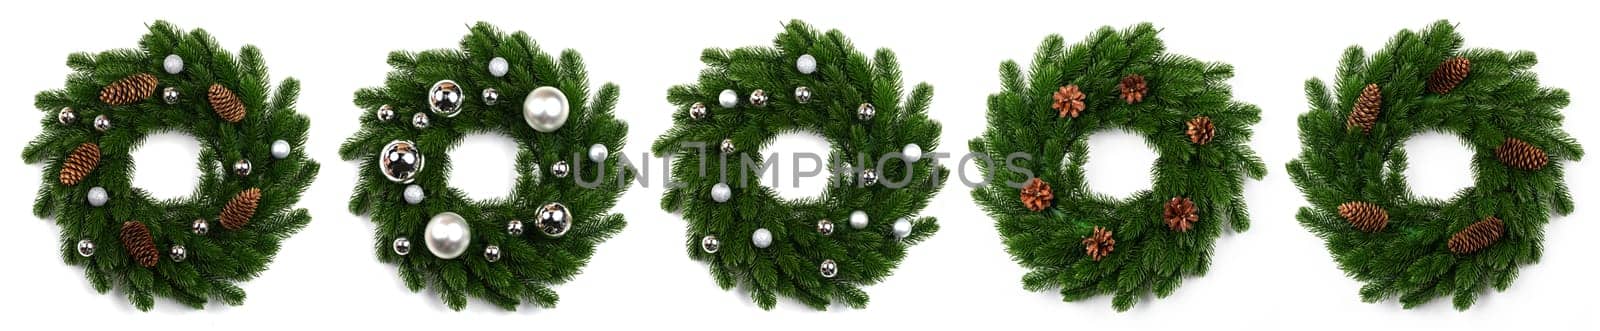 isolated christmas wreath and silver balls on white by Yellowj